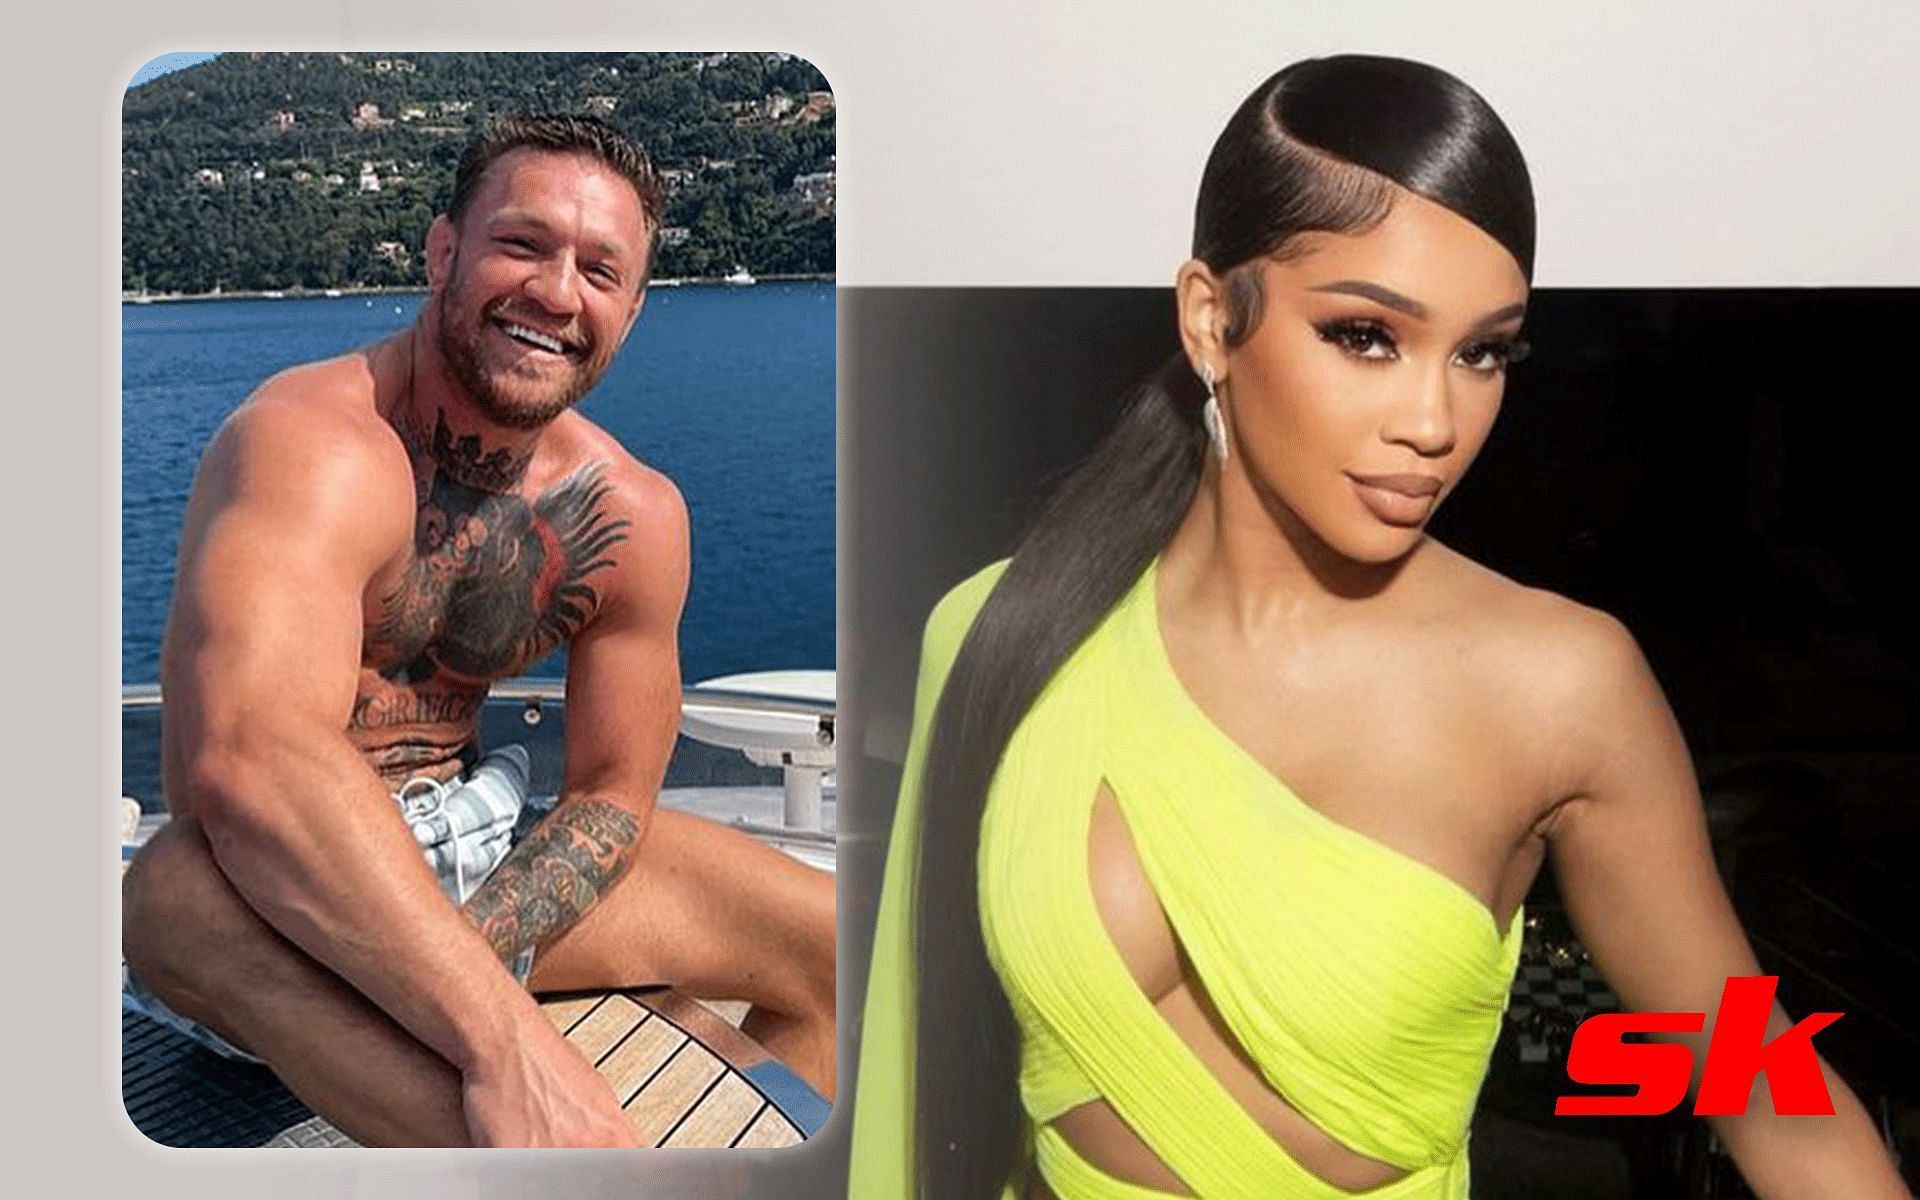 Conor McGregor [L] and Saweetie [R] [Images via @thenotoriousmma and @saweetie Instagram]